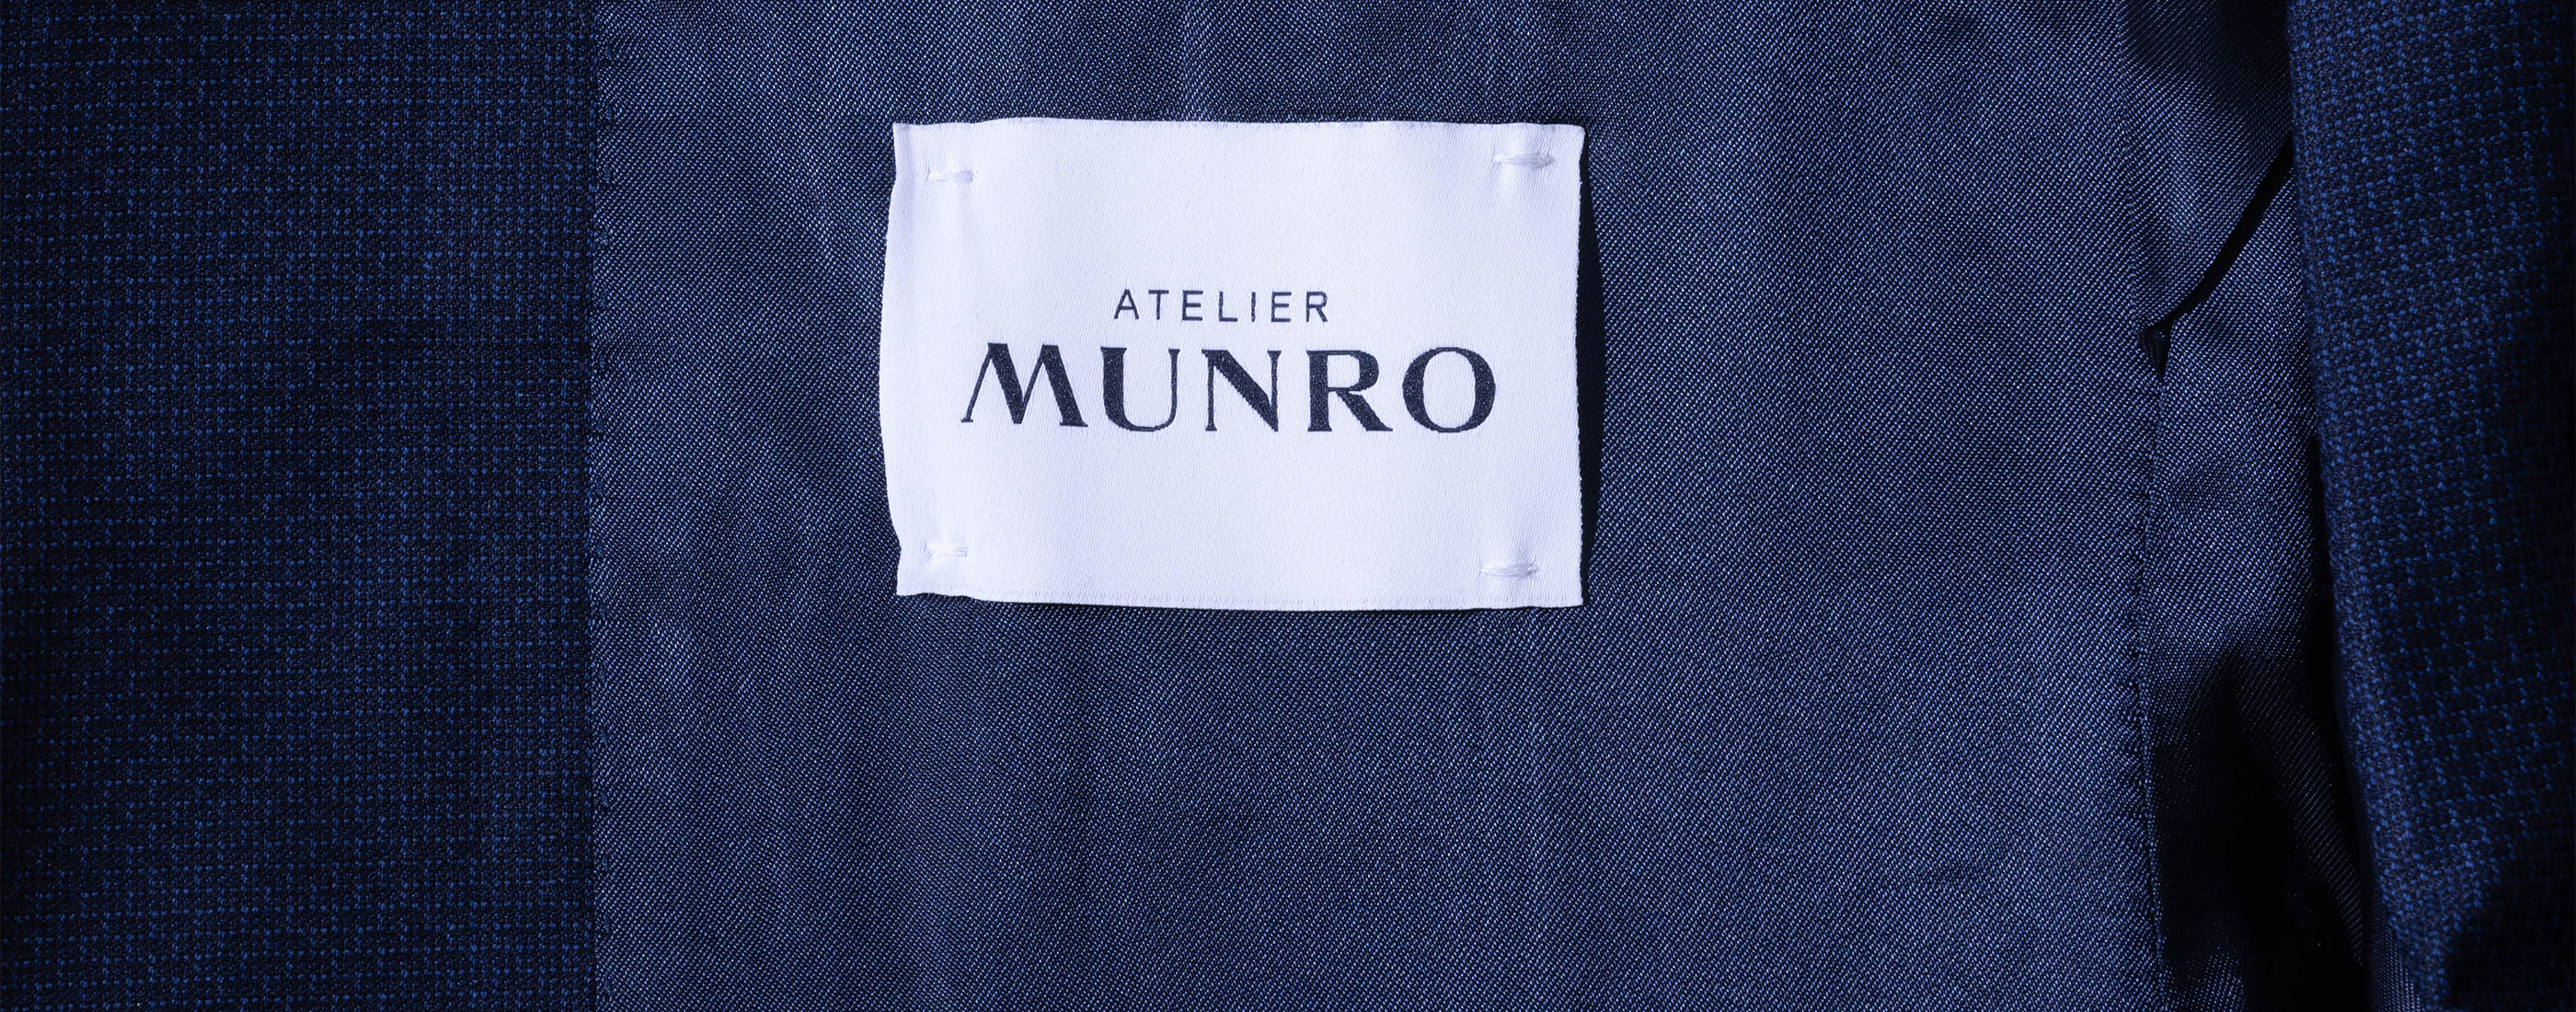 Bring in your old Atelier Munro